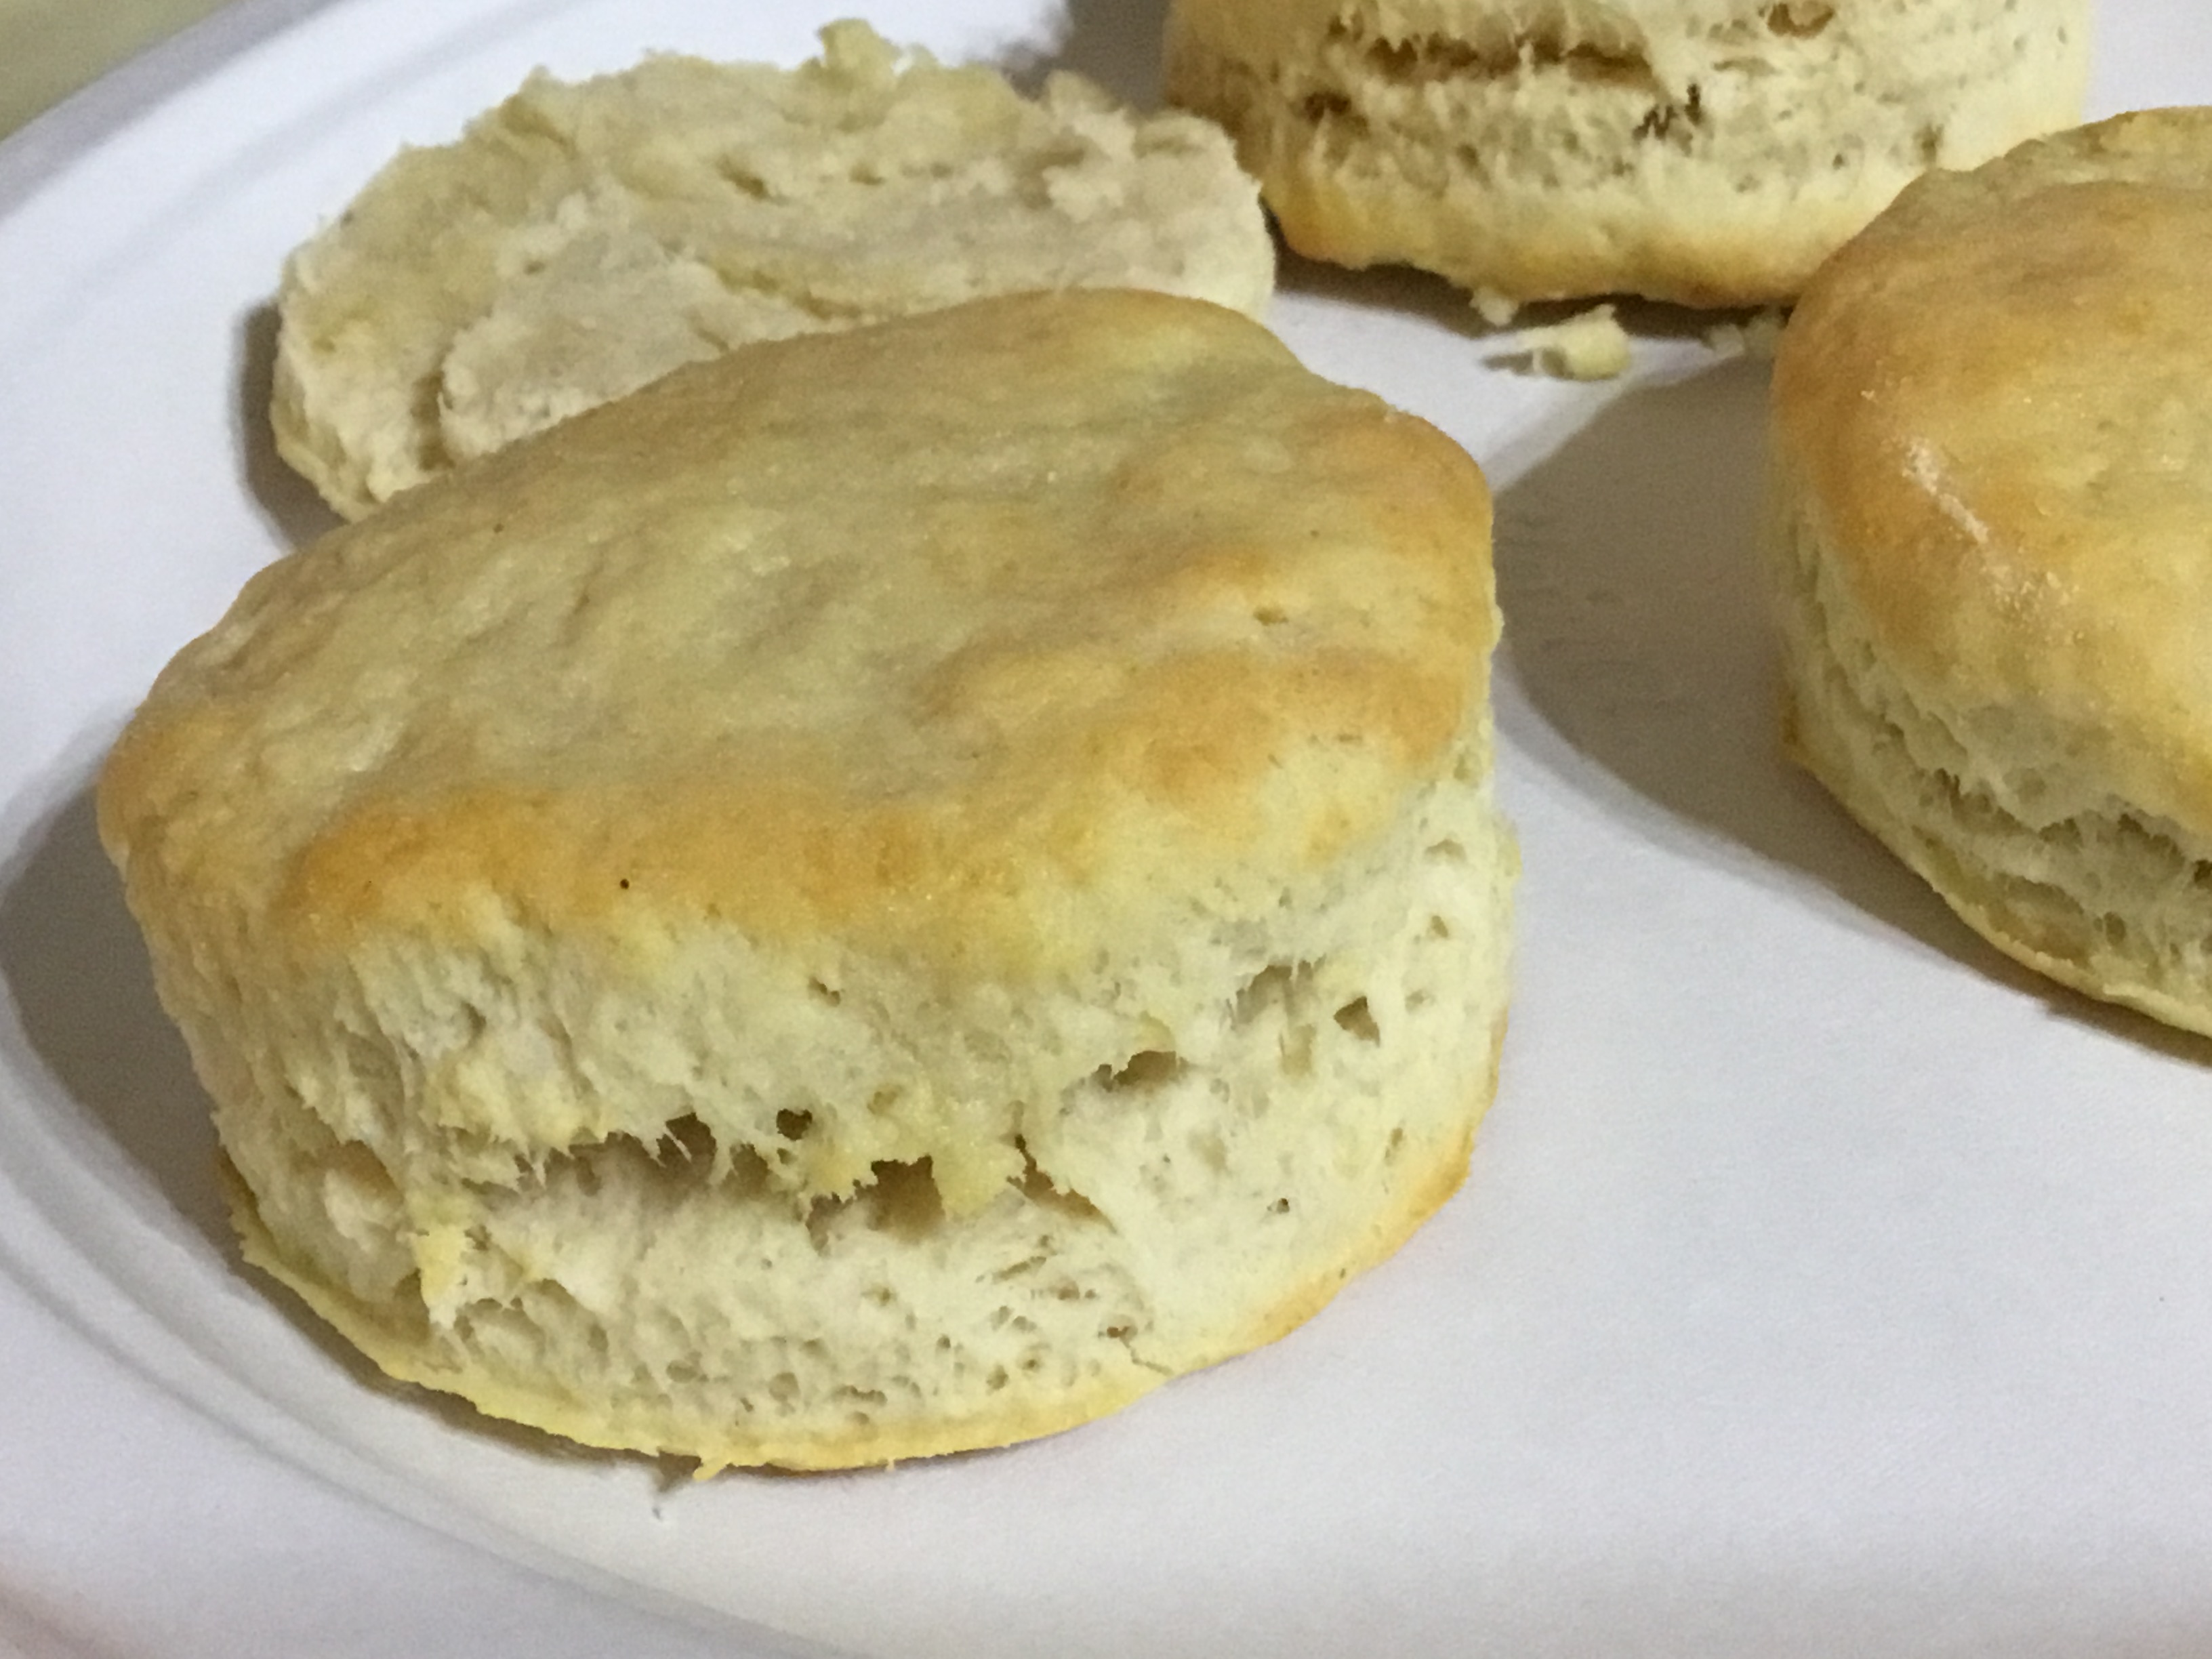 Easy and quick to make, never use canned biscuits again!